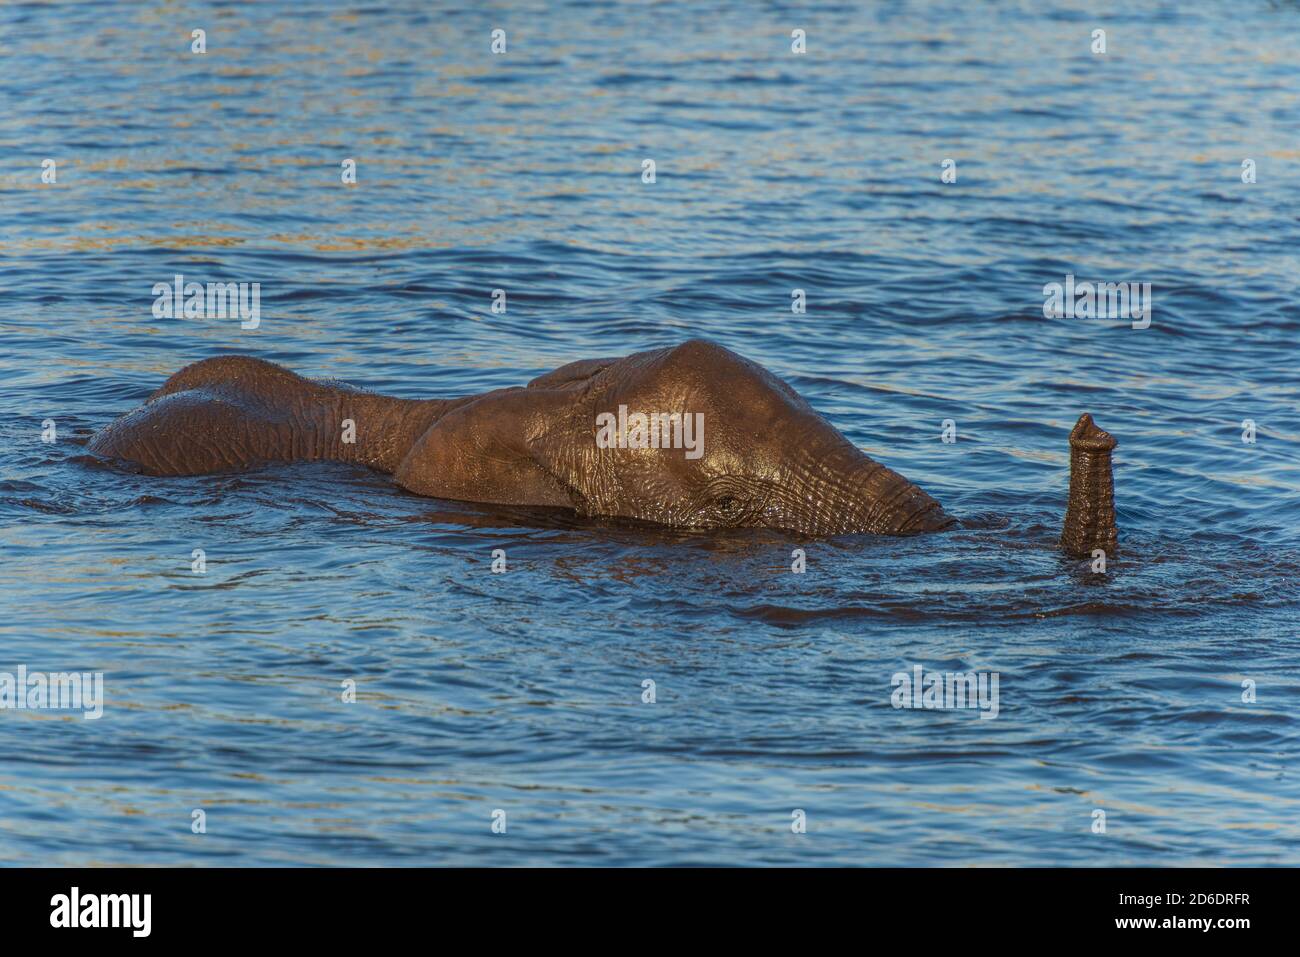 Elephant almost completely in the water, trunk over water. Etosha, Namibia Stock Photo